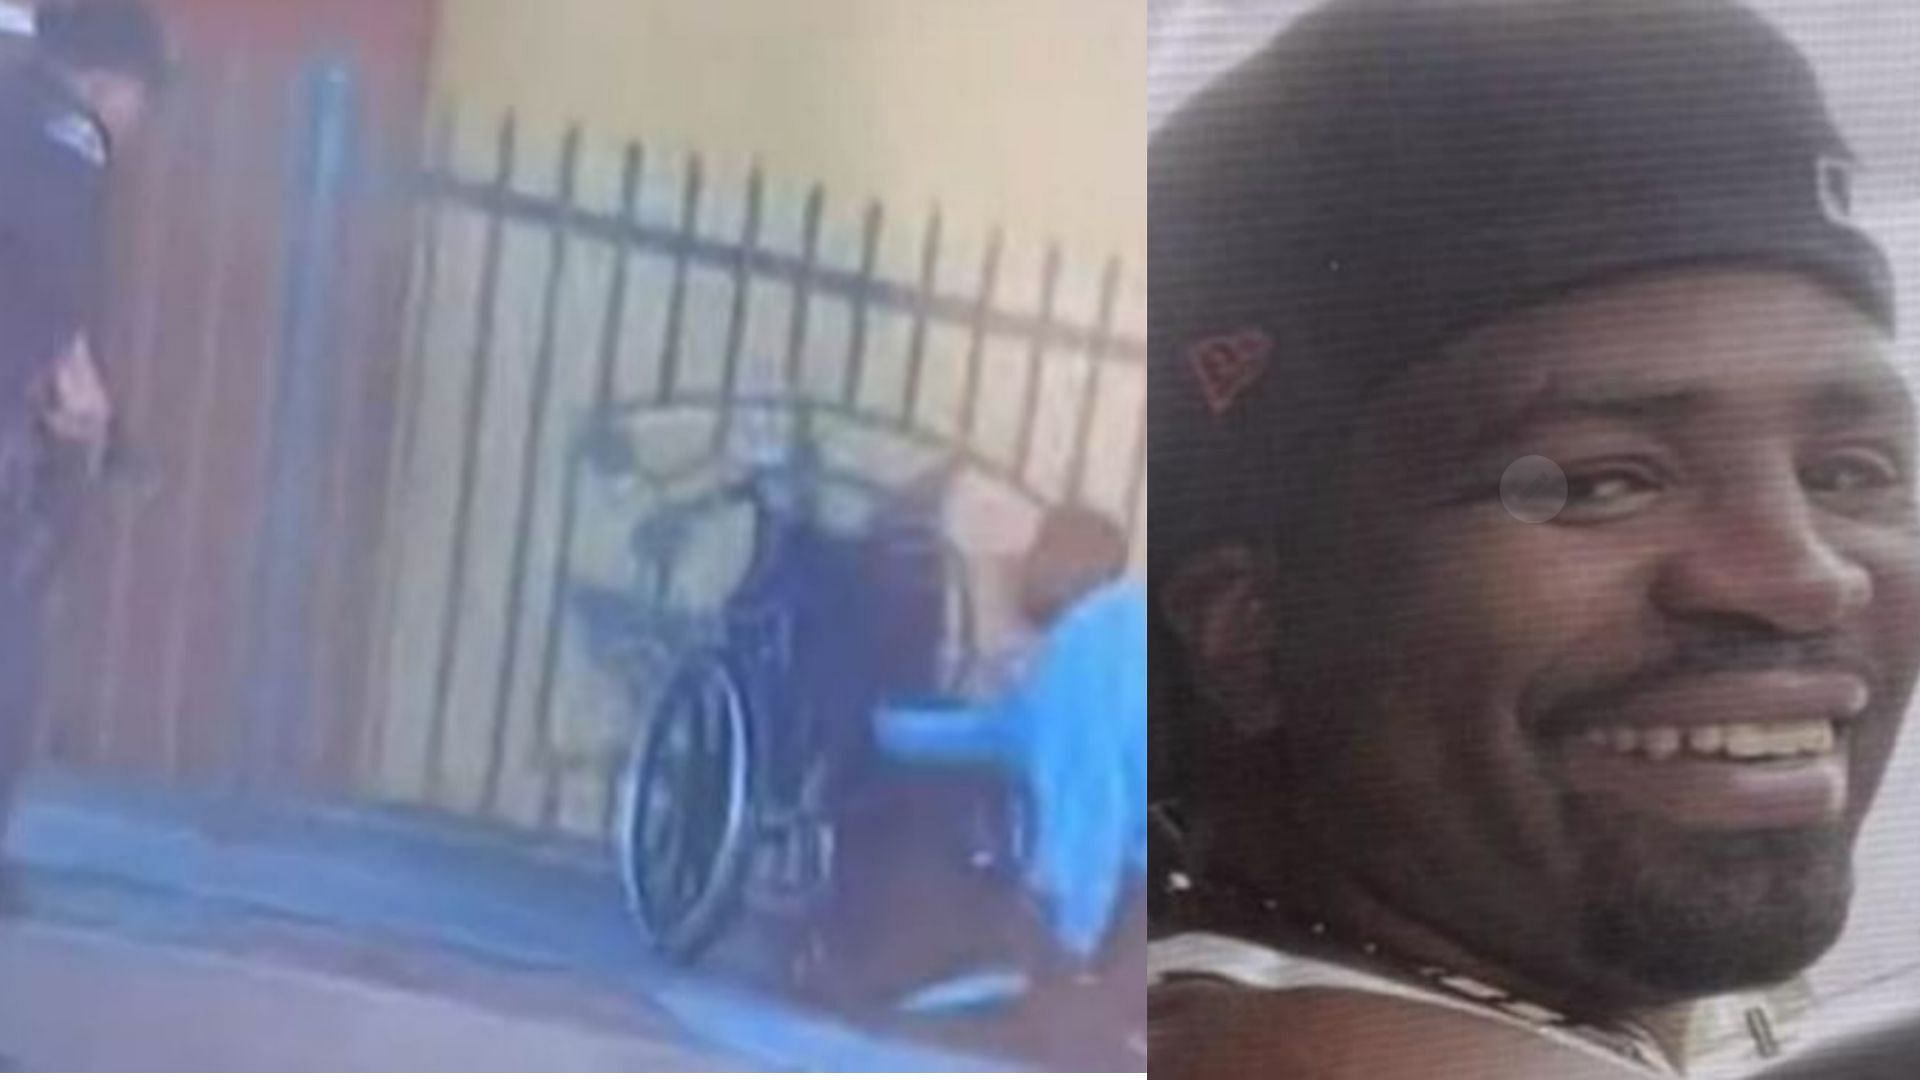 Police kill Anthony Lowe Jr., a double amputee in Los Angeles (Image via MikeSington and rafaelshimunov/Twitter)